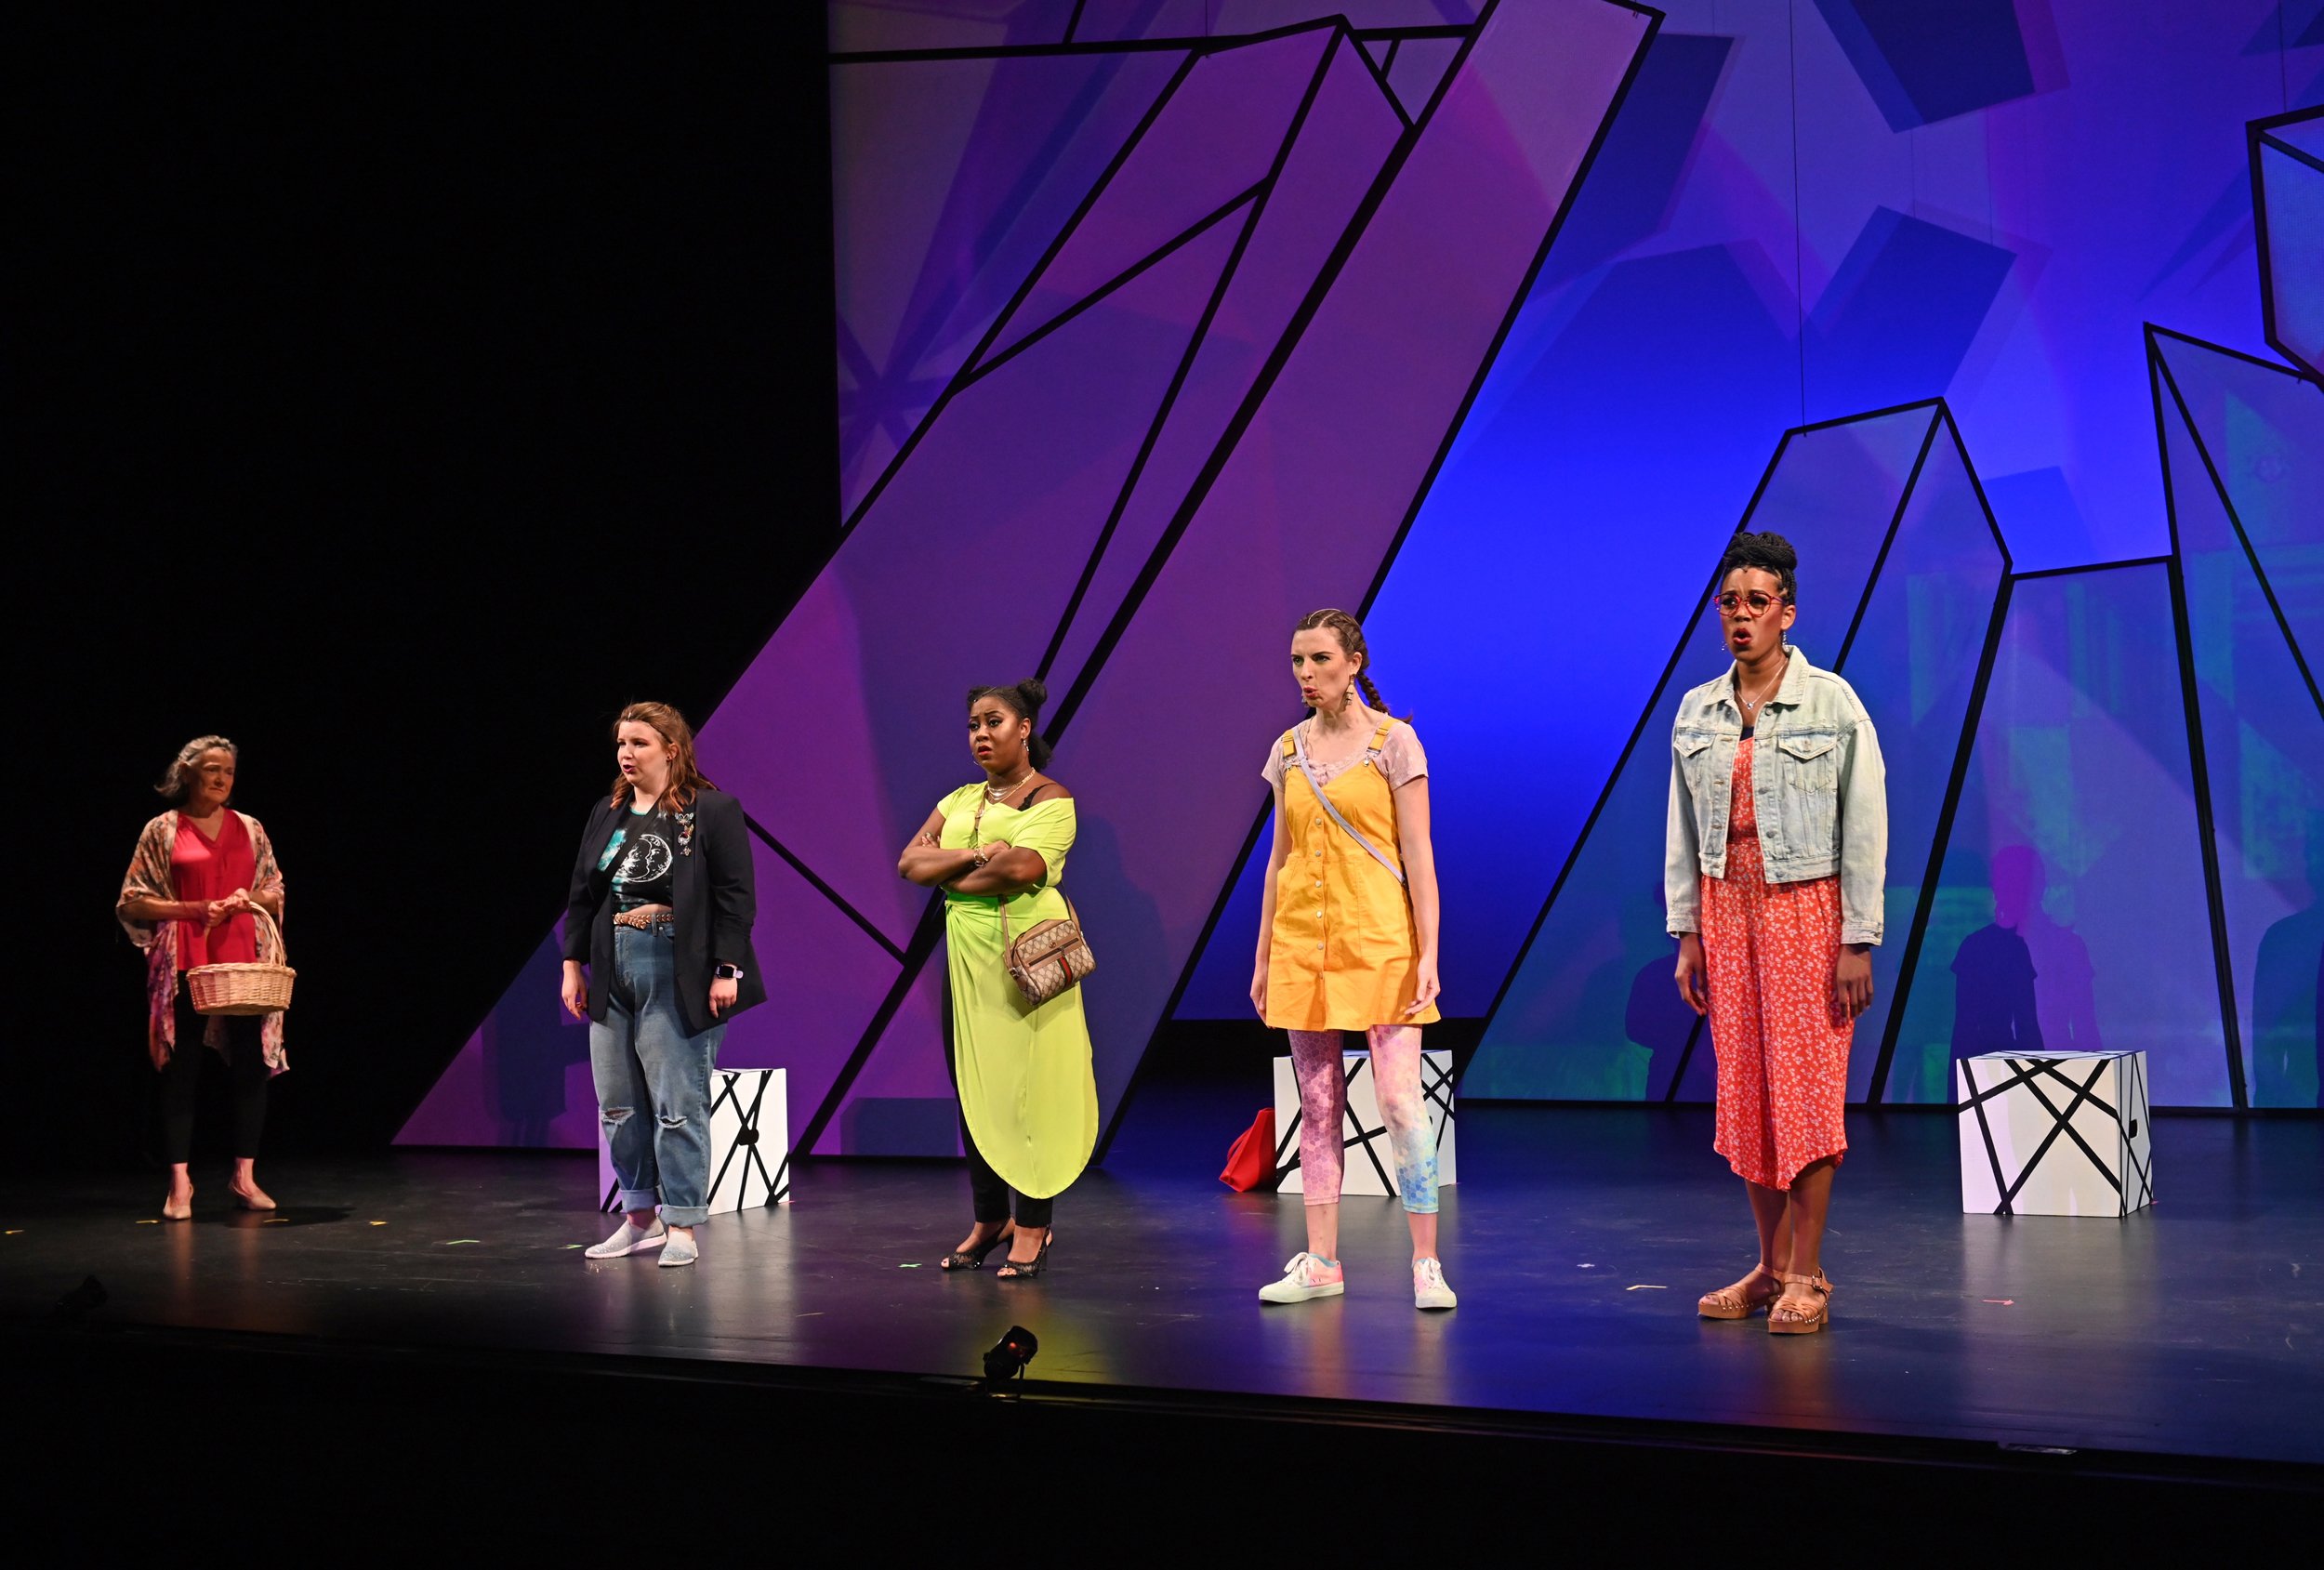  Ms. Lee-Adler (Wendy Hill), with Rumer (Megan Graves), Nyomi (Victoria Ellington), Vesta (Lauren McAllister), and Morgan (Alicia Russell Tagert). Photo by Philip Groshong. 